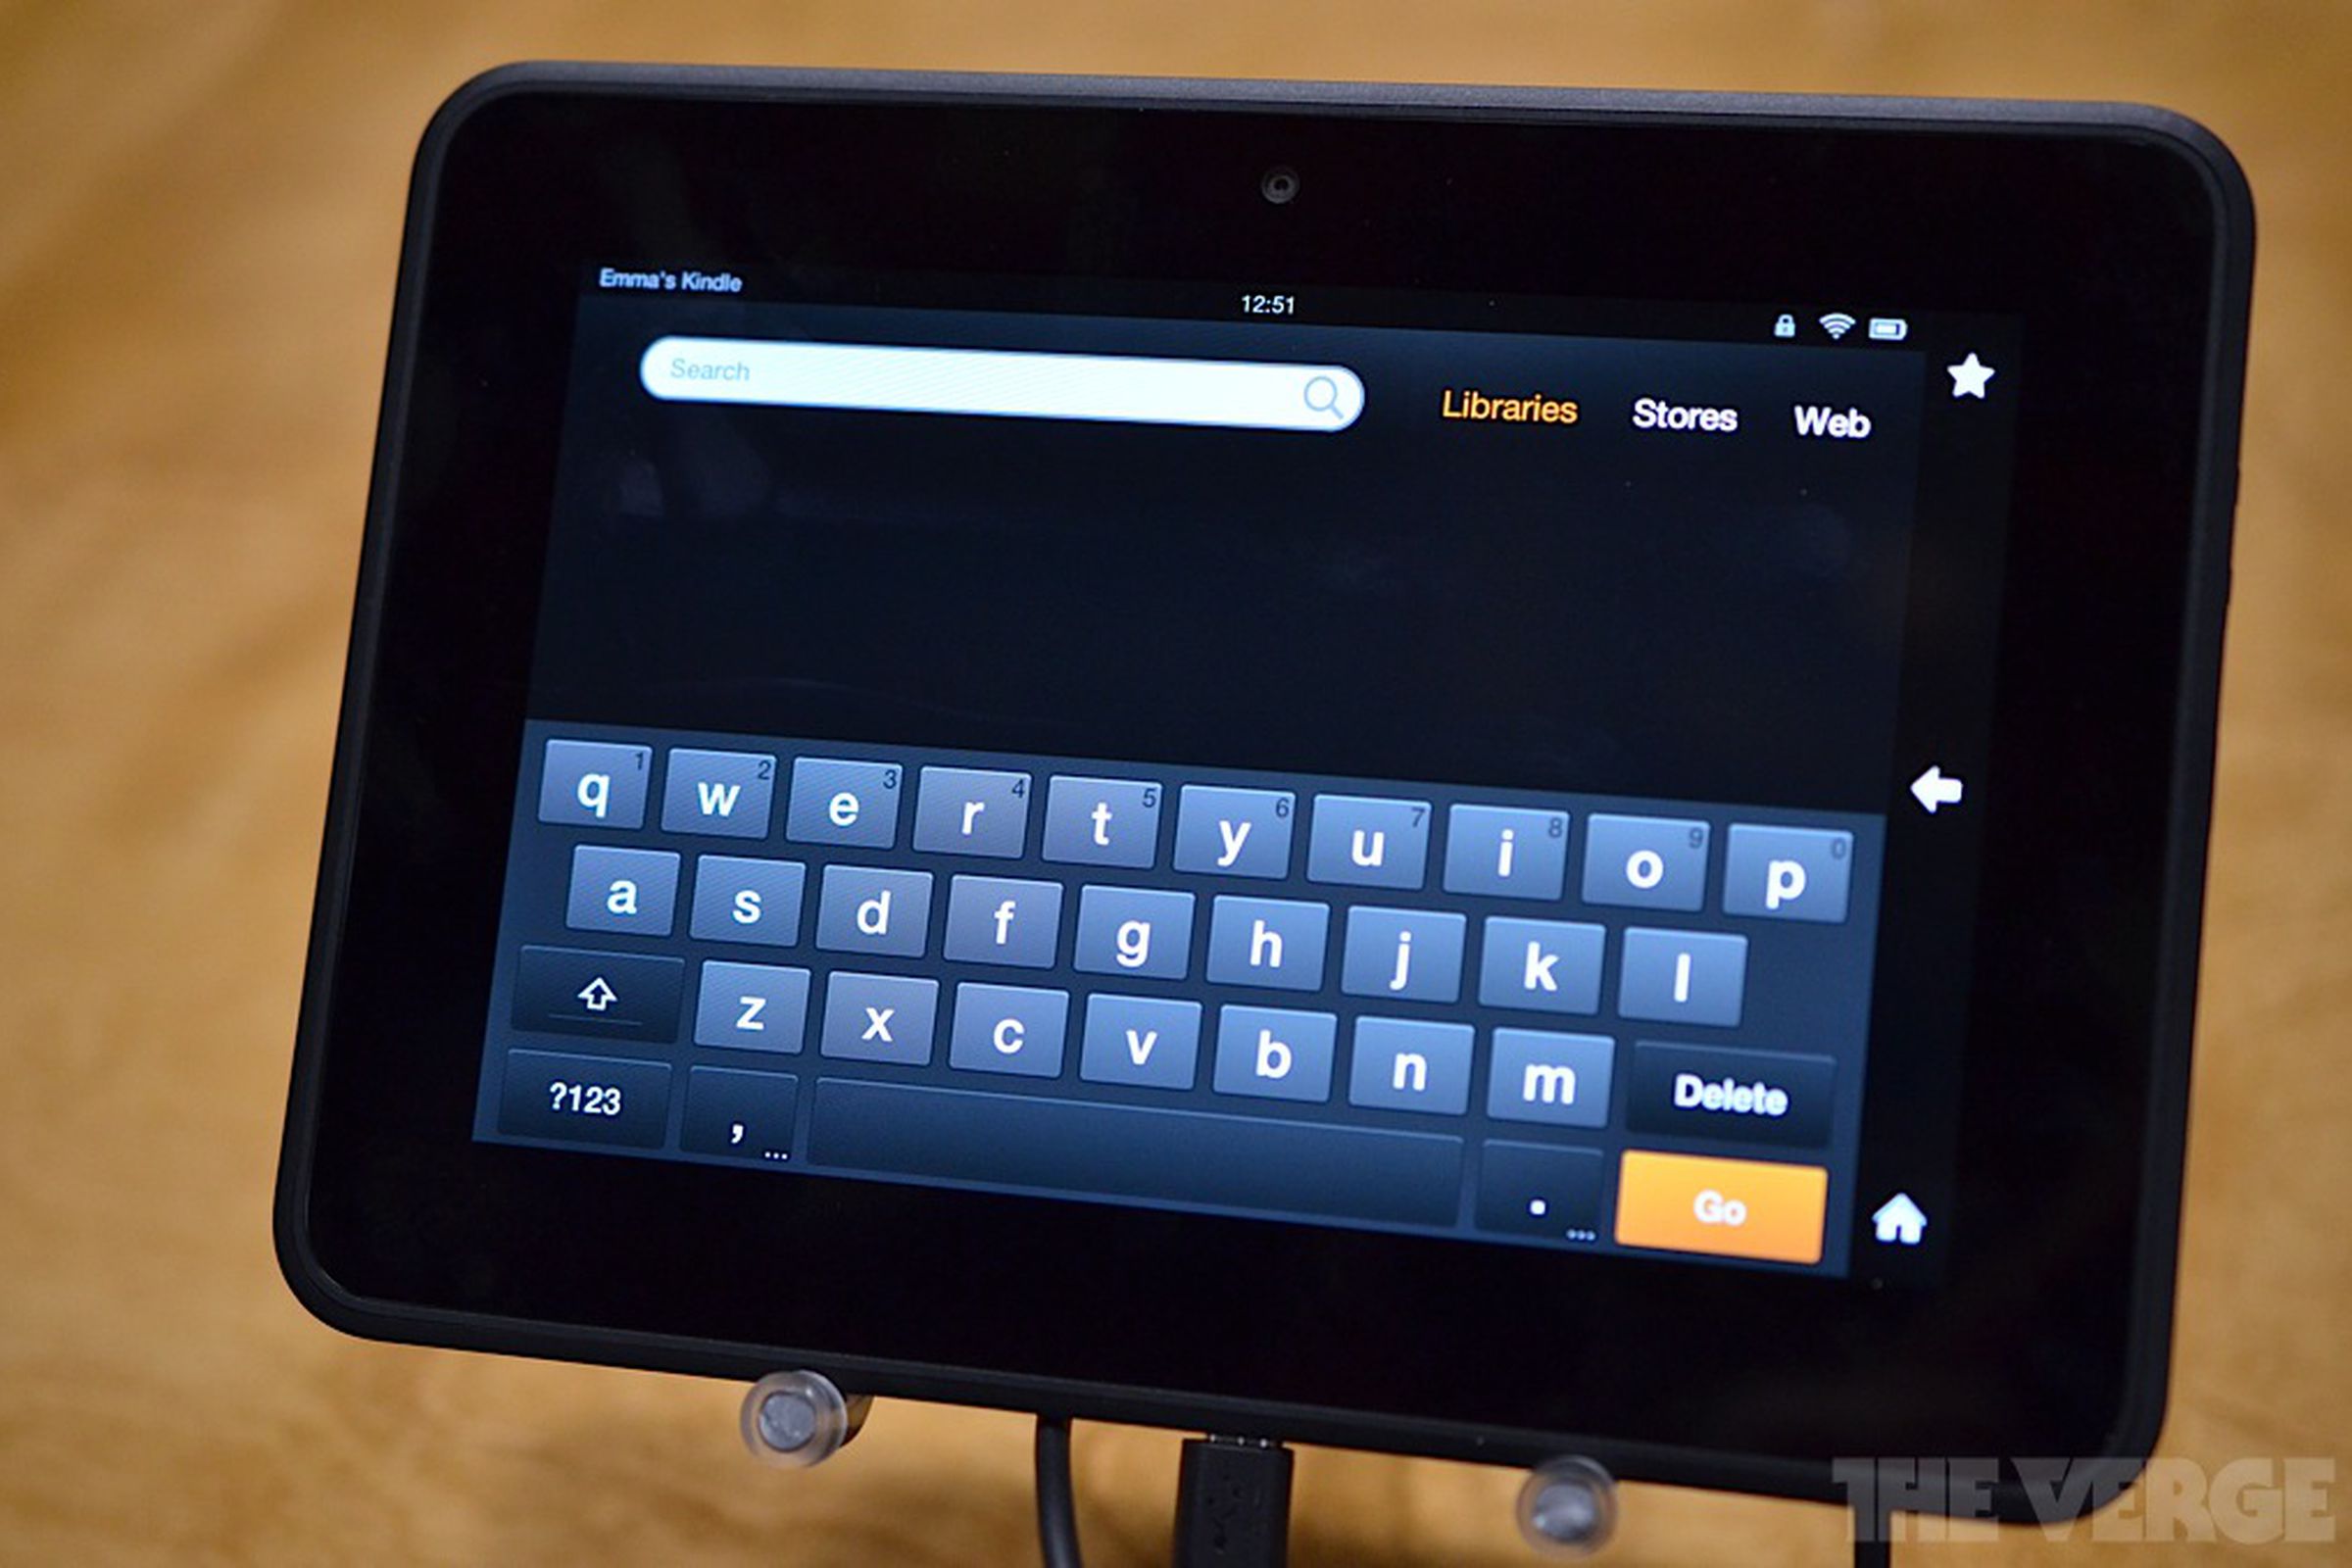 Gallery Photo: Amazon's 7-inch Kindle Fire HD hands-on pictures